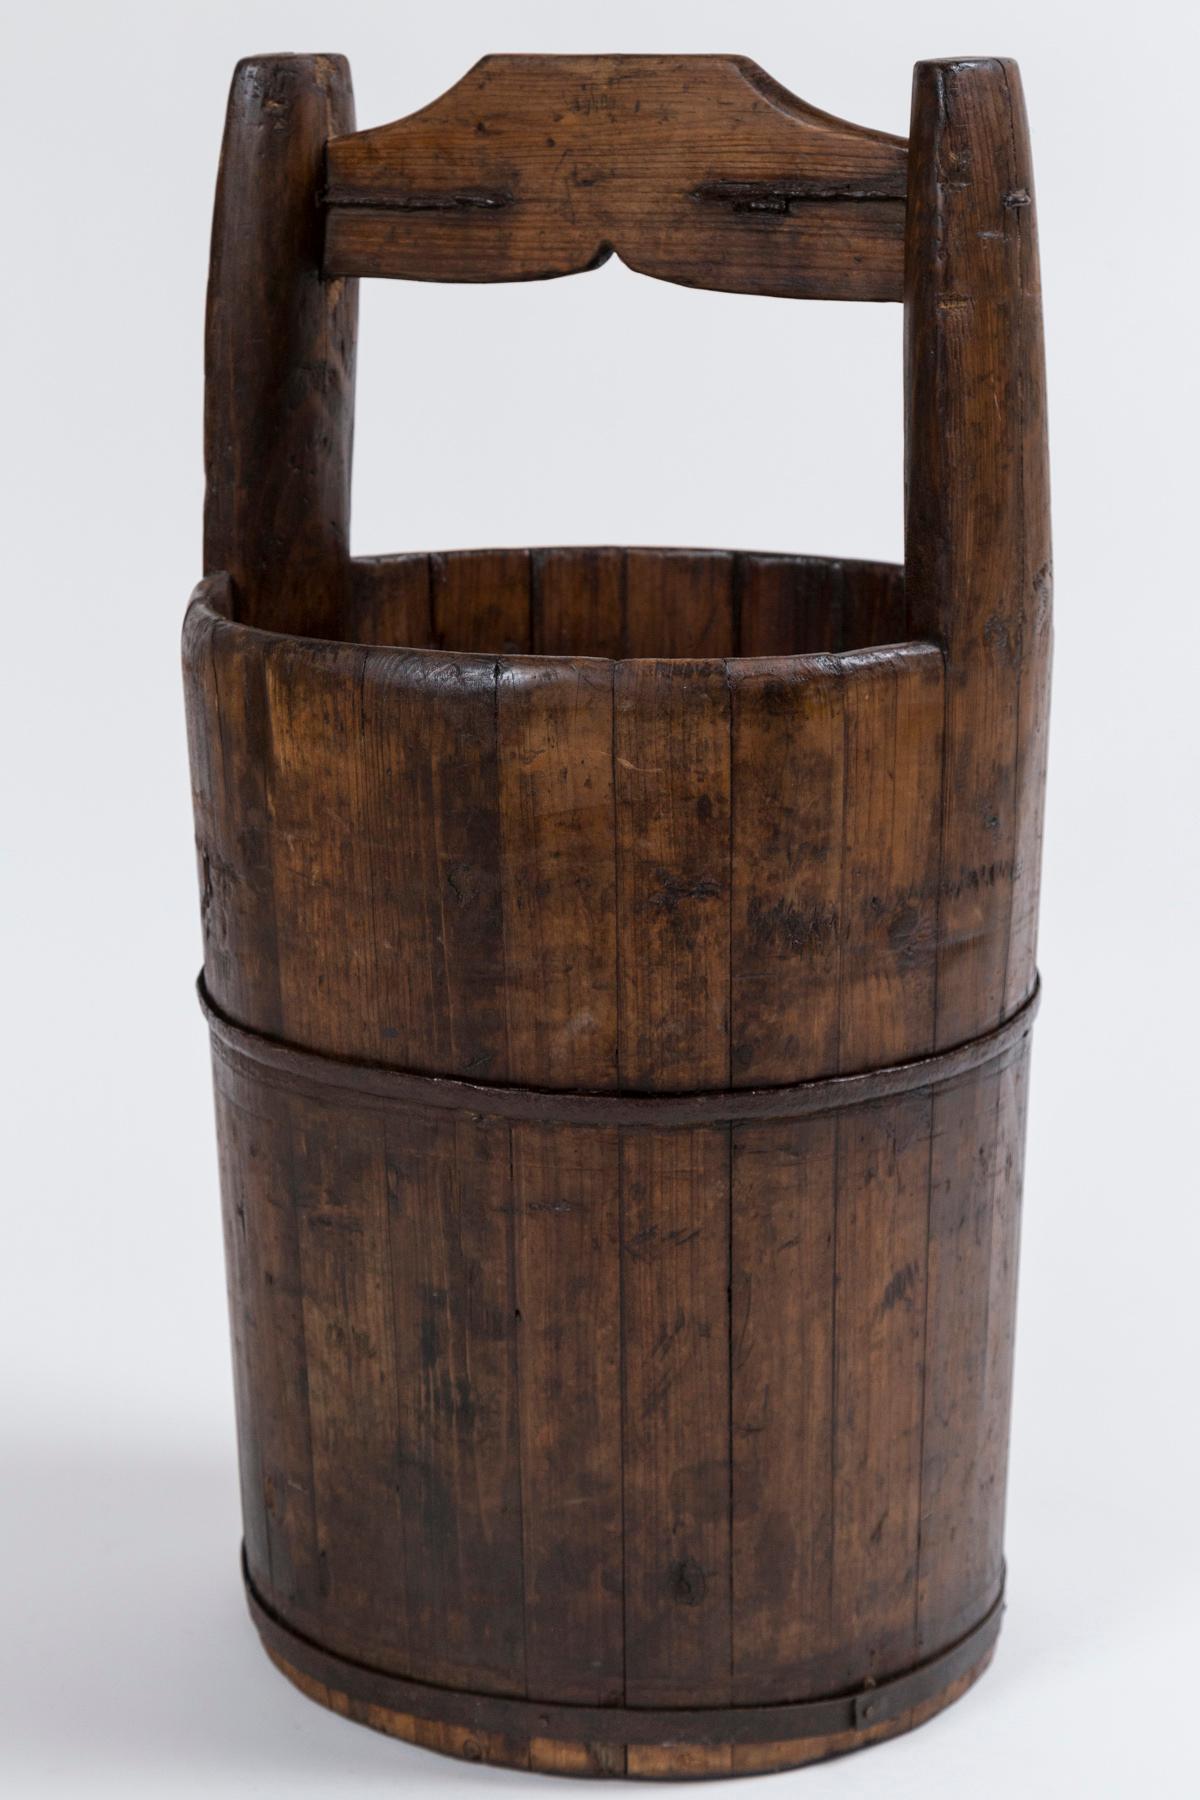 Antique Chinese Water Bucket, early 20th century. Cylindrical form with carved handle. Original iron fittings.